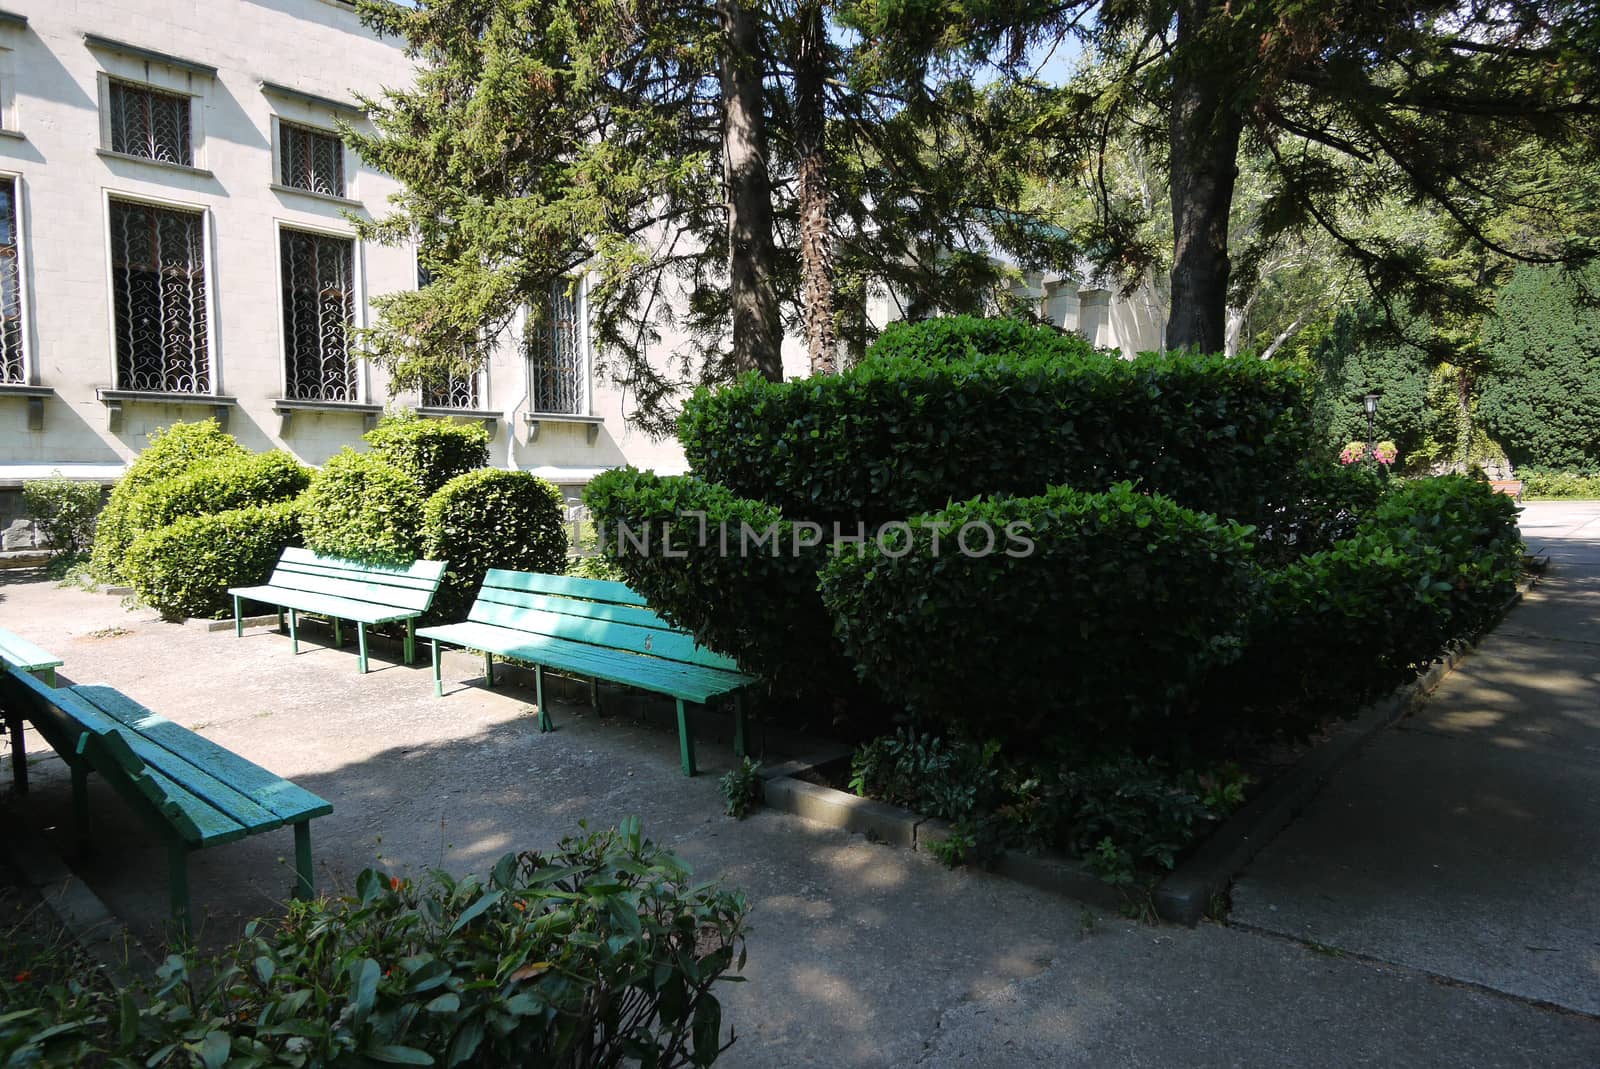 Figured flowerbeds and benches near a two-story gray building by Adamchuk